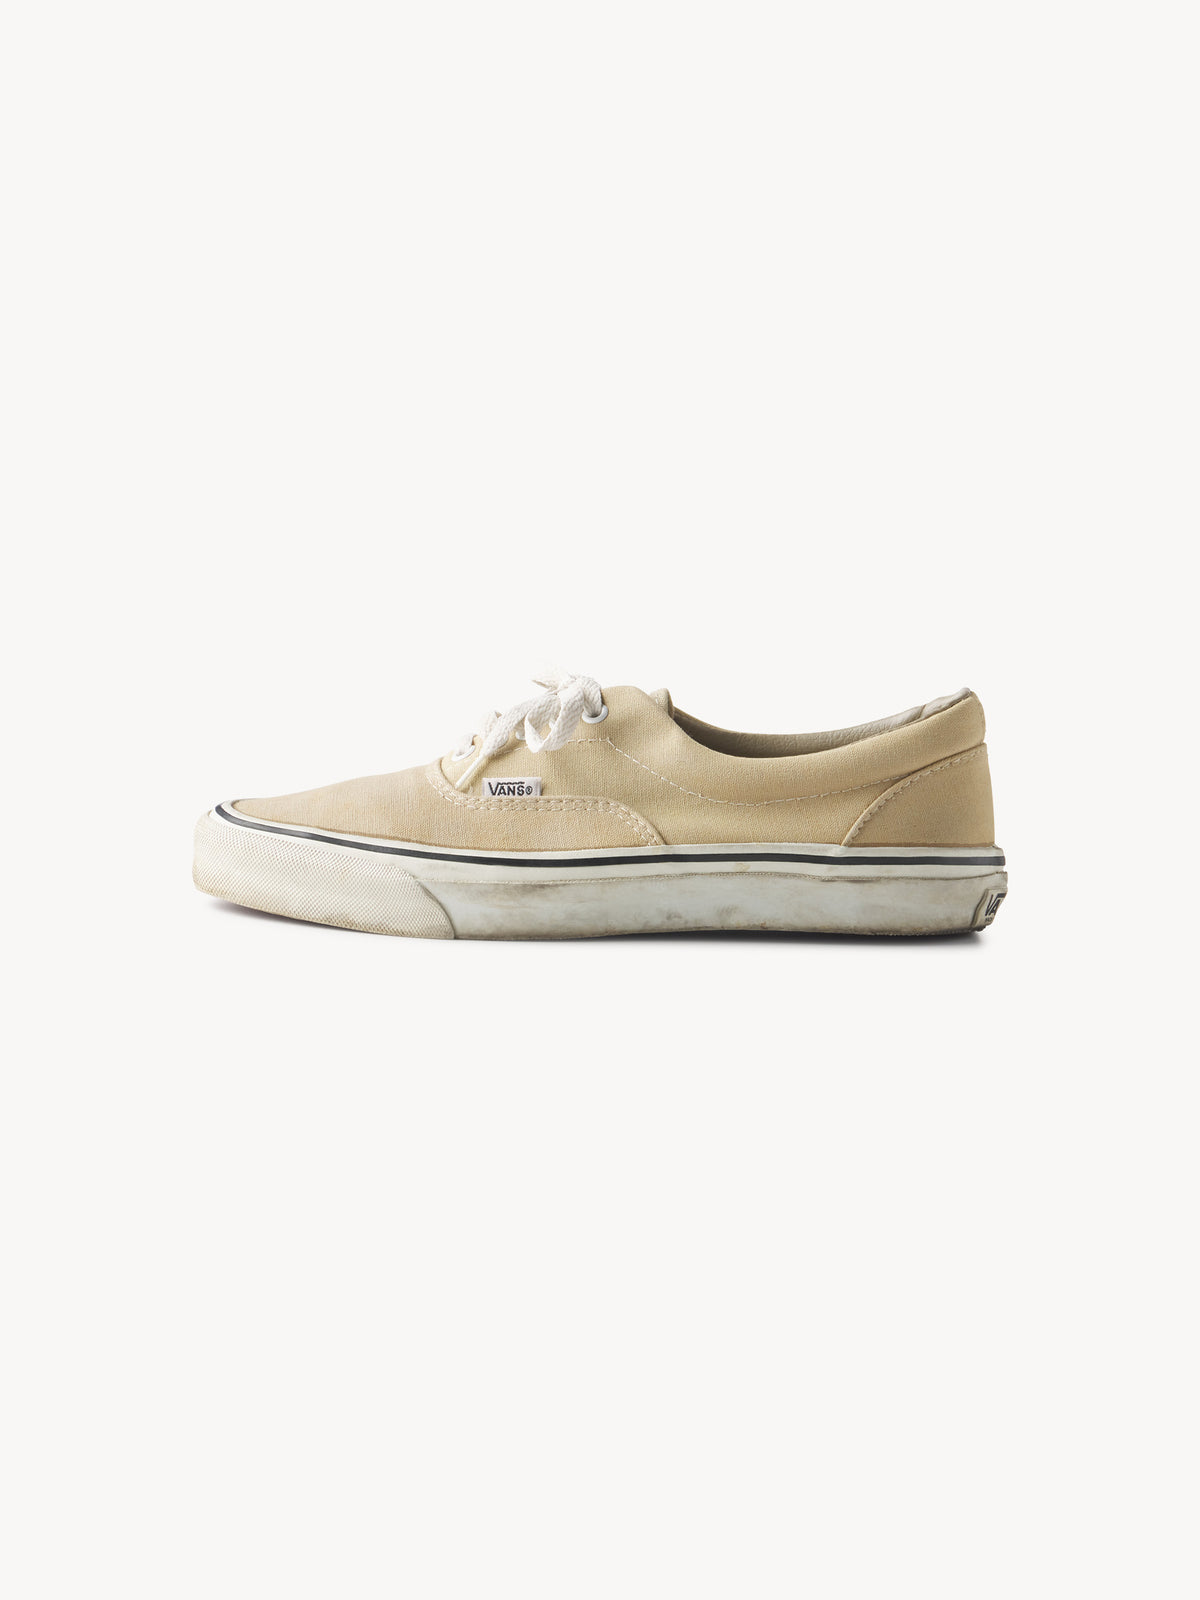 Made in USA Vans - 0050 - Product flat